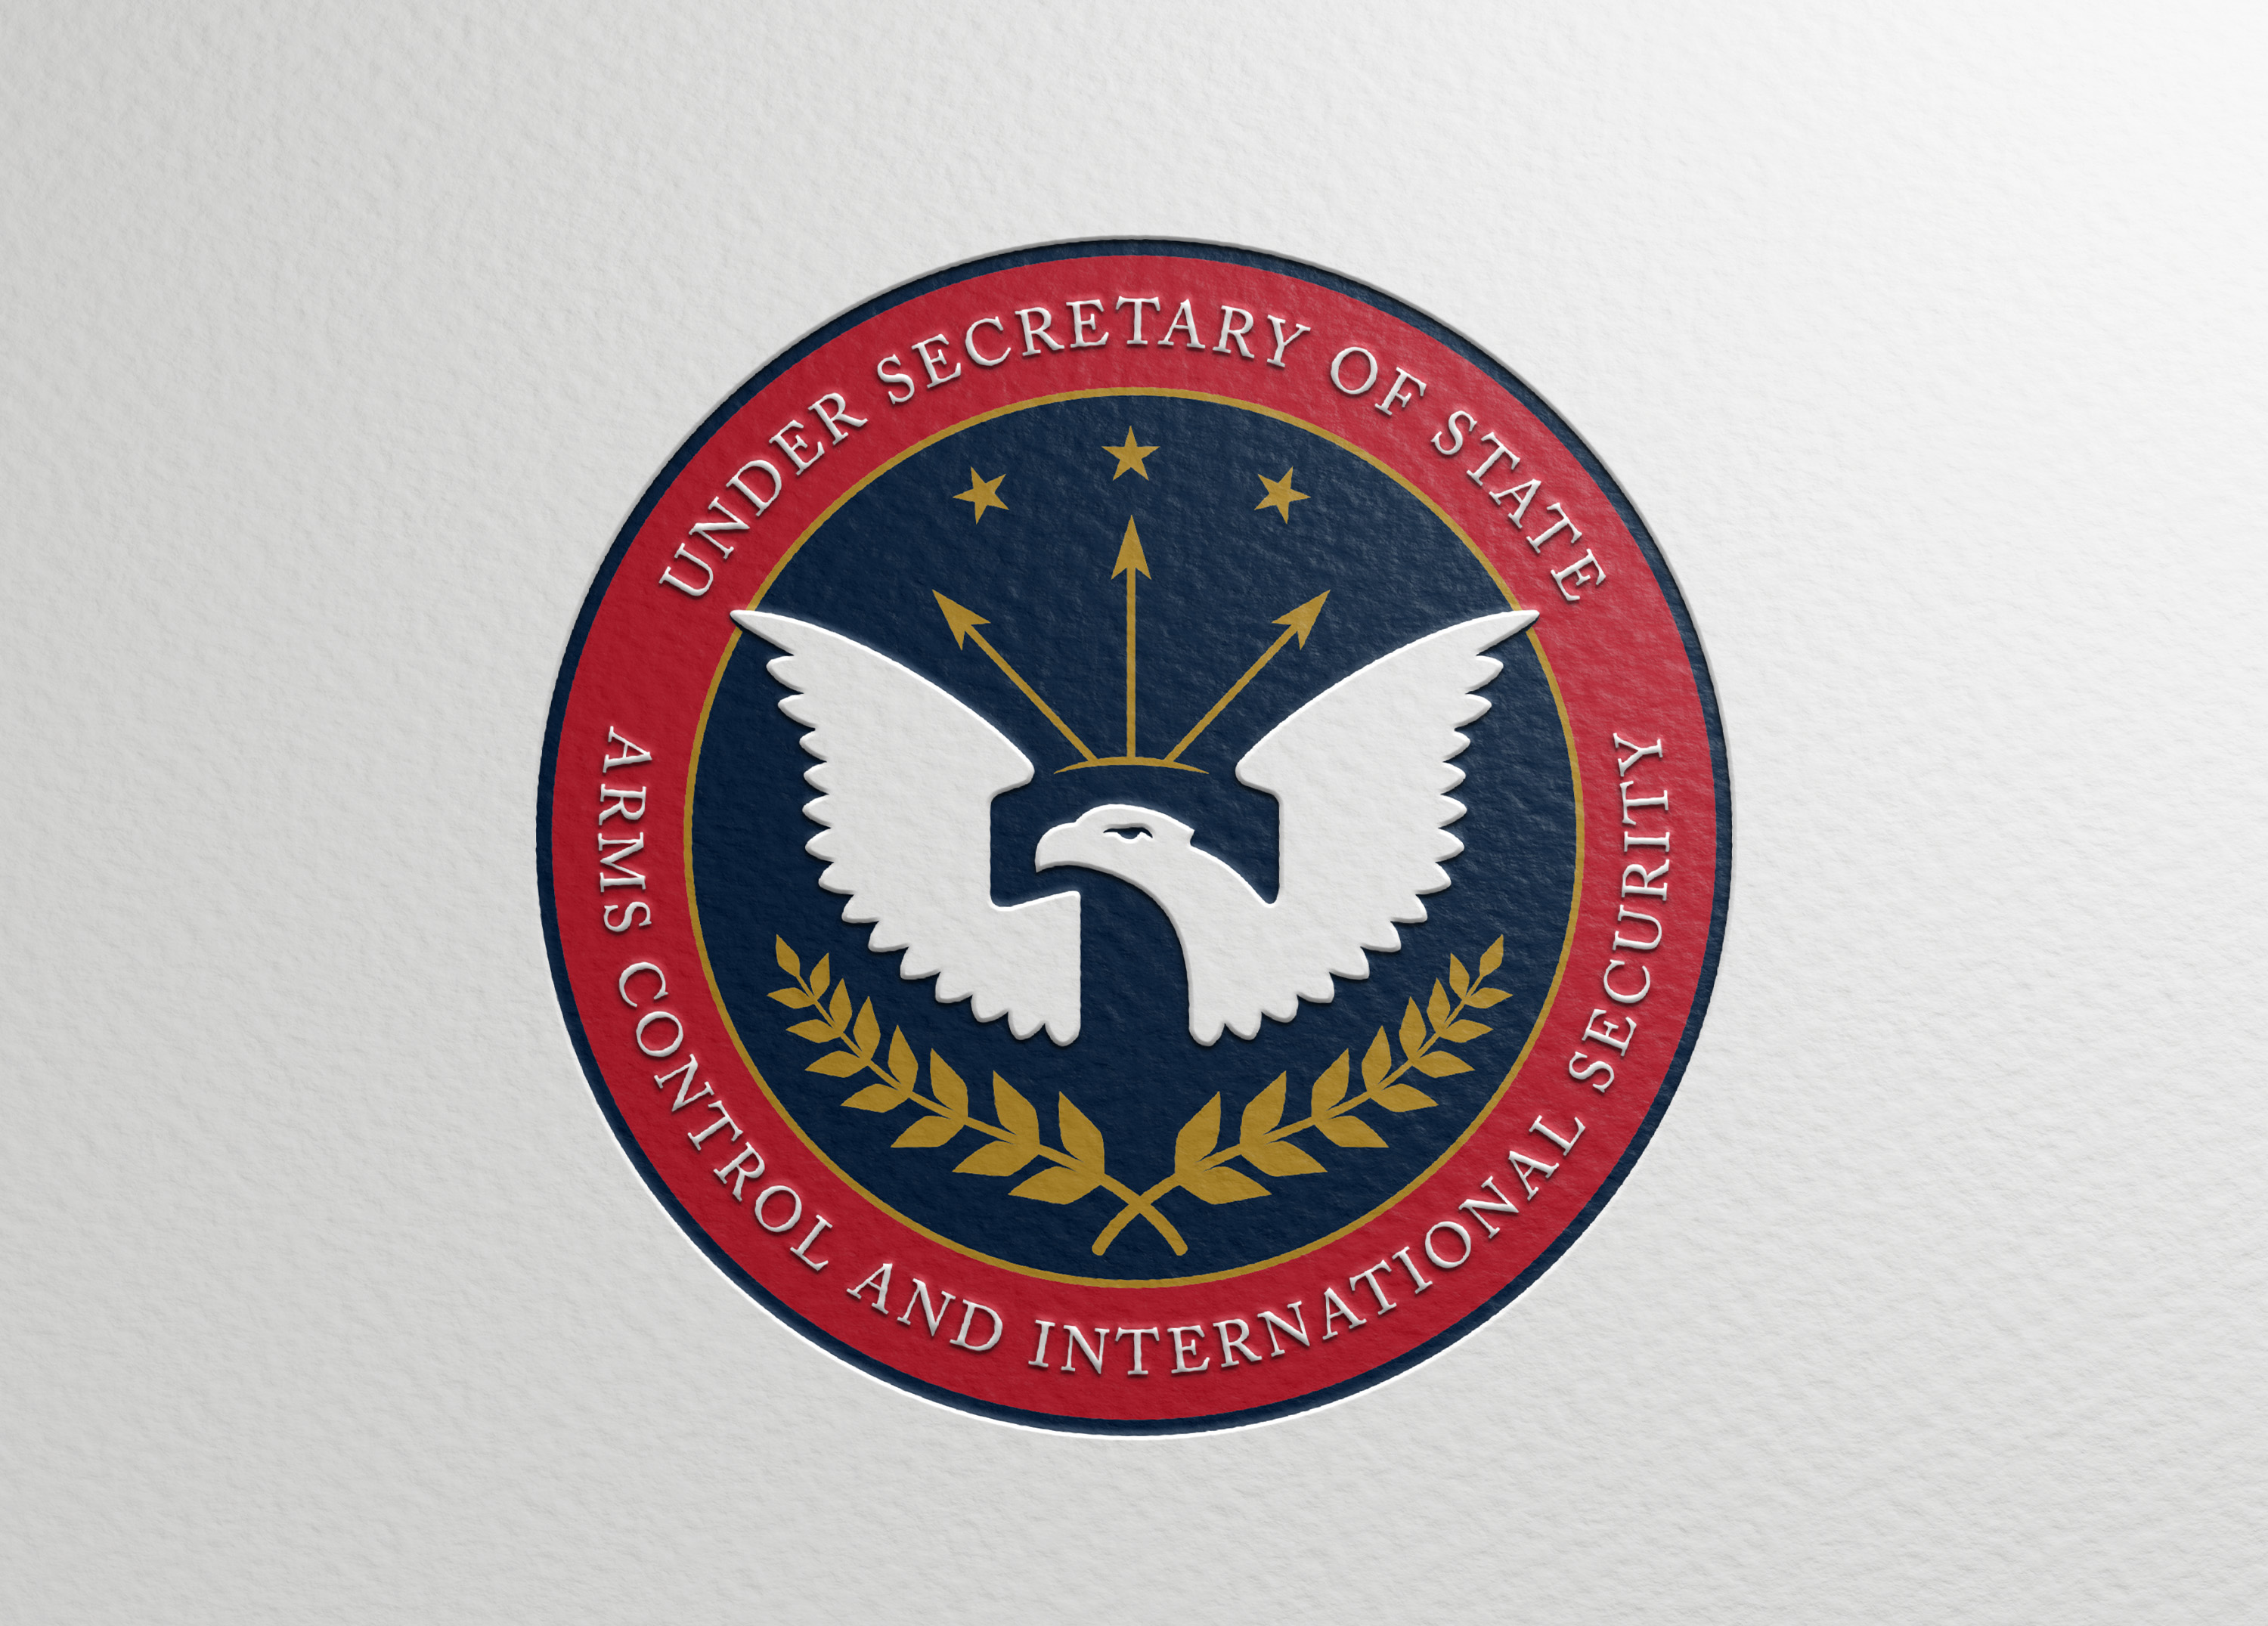 US Department of State Under Secretary for Arms Control and International Security logo